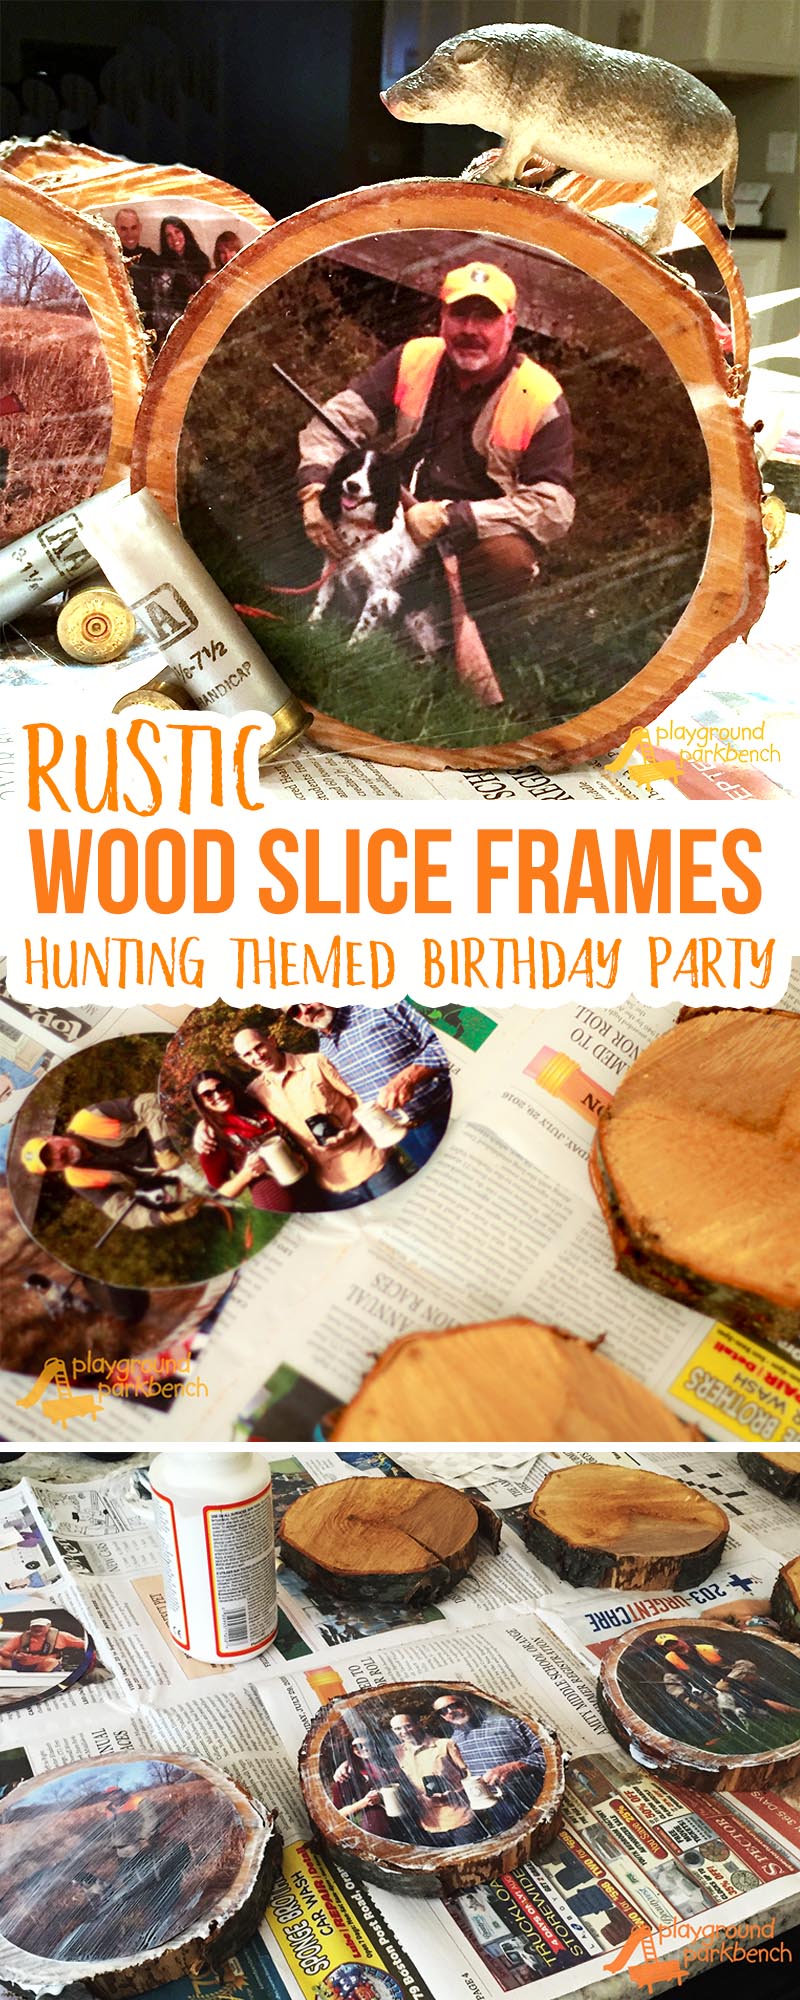 Want a fun, personalized touch to your Hunting Themed Birthday Party? These Rustic Wood Slice Frames were such a festive touch to our party centerpieces. They also now make awesome home decor accents at my in-law's mountain cabin home. | Party Ideas | Home Decor | DIY | Photo Frames | Rustic Home Decor | Cabin Decor |